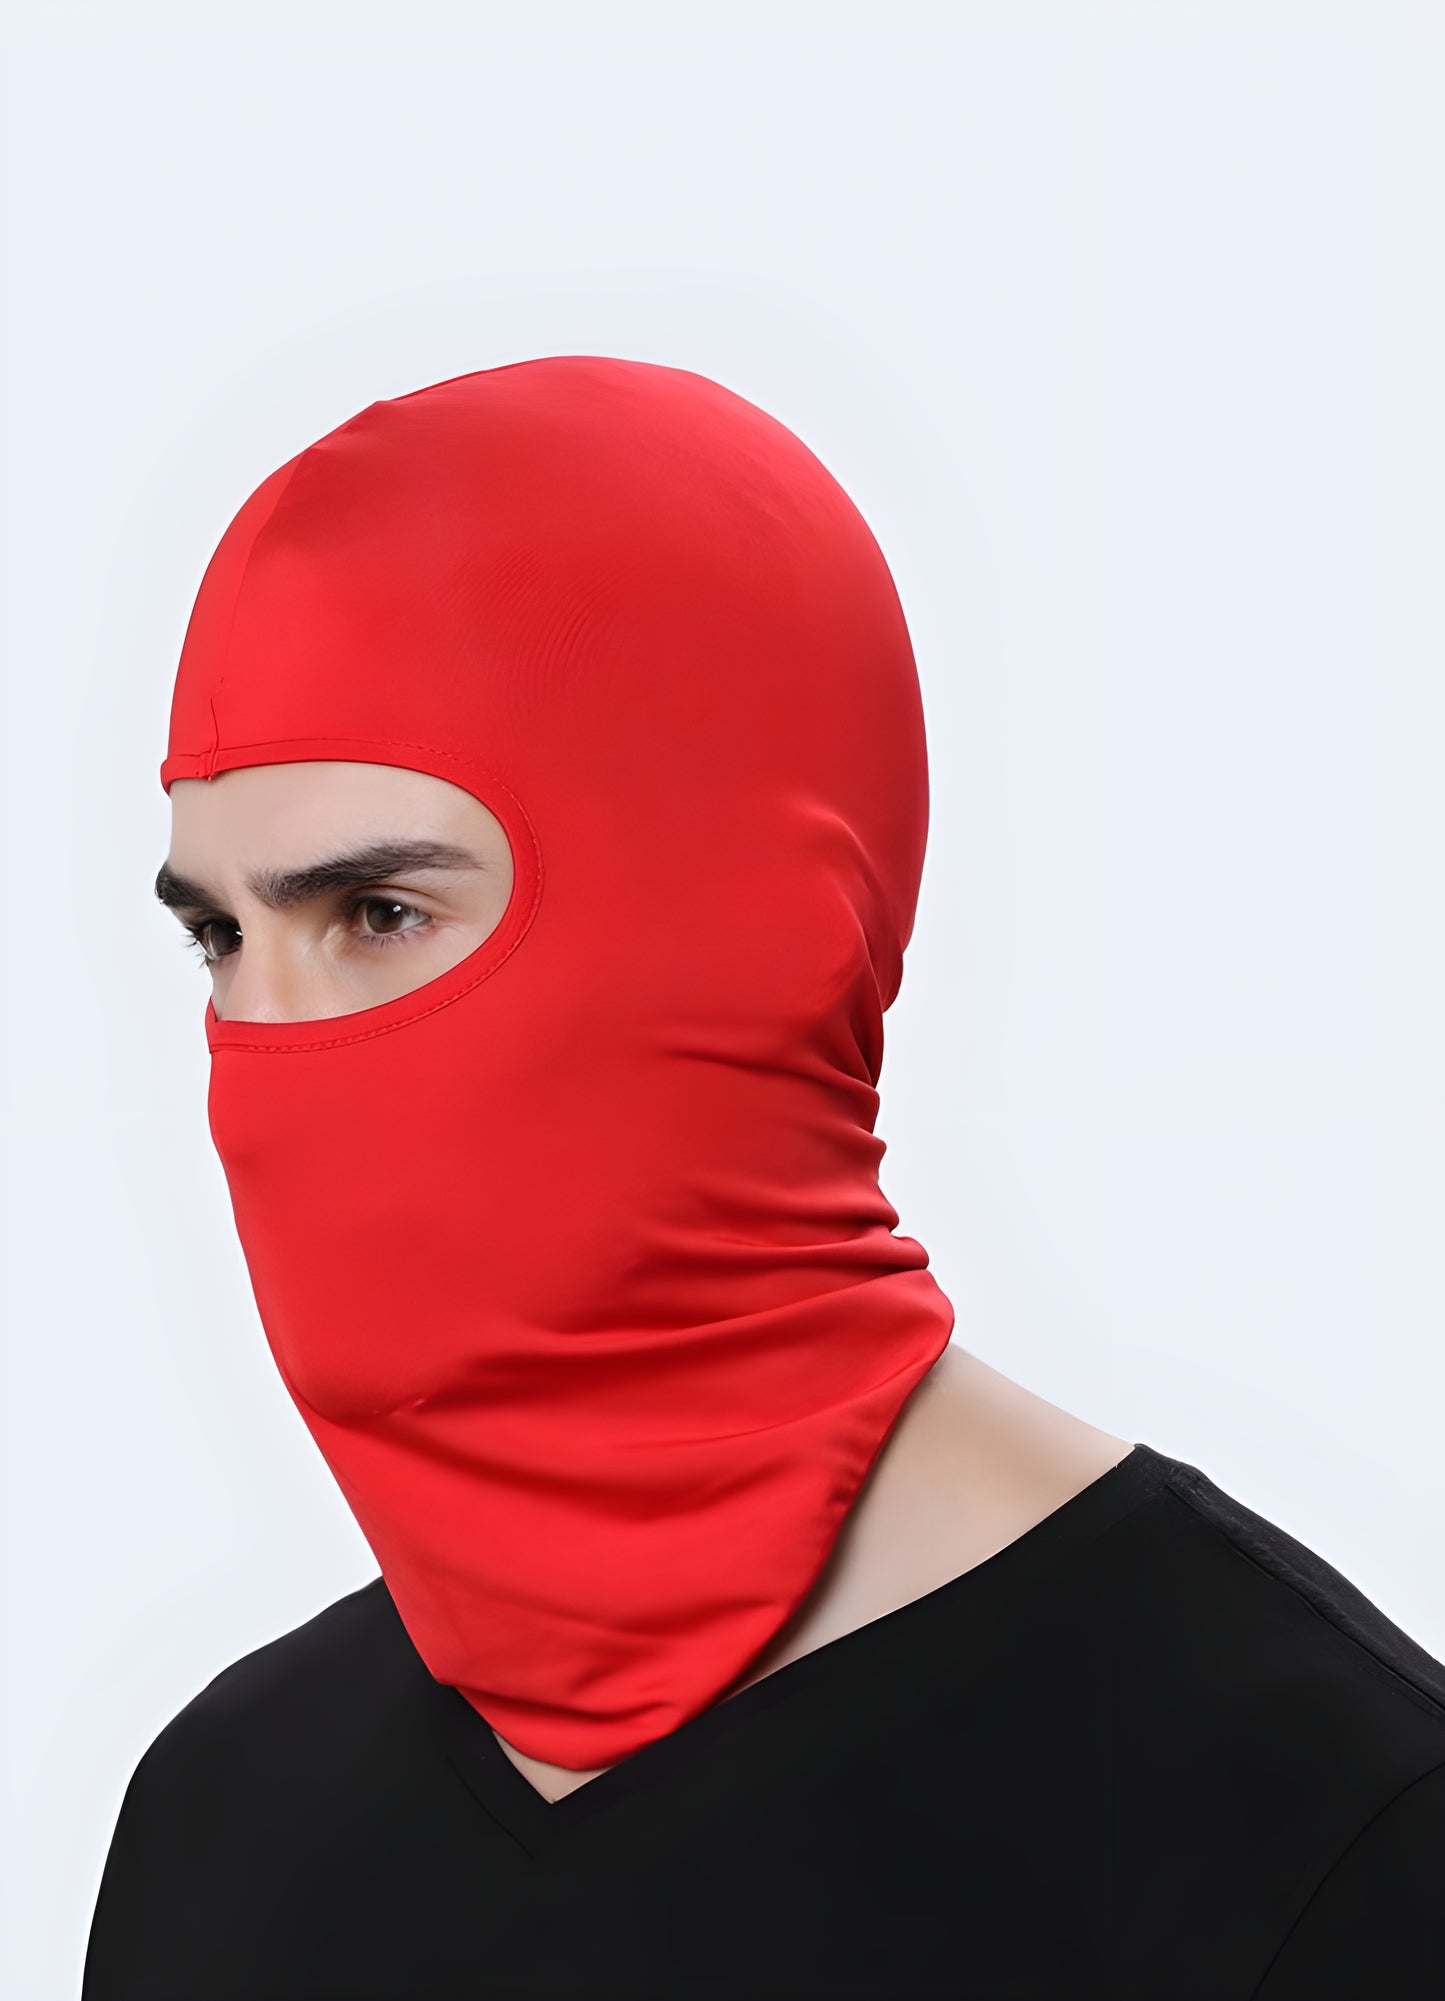 Lightweight & agile, this balaclava lets you move freely without sacrificing warmth.